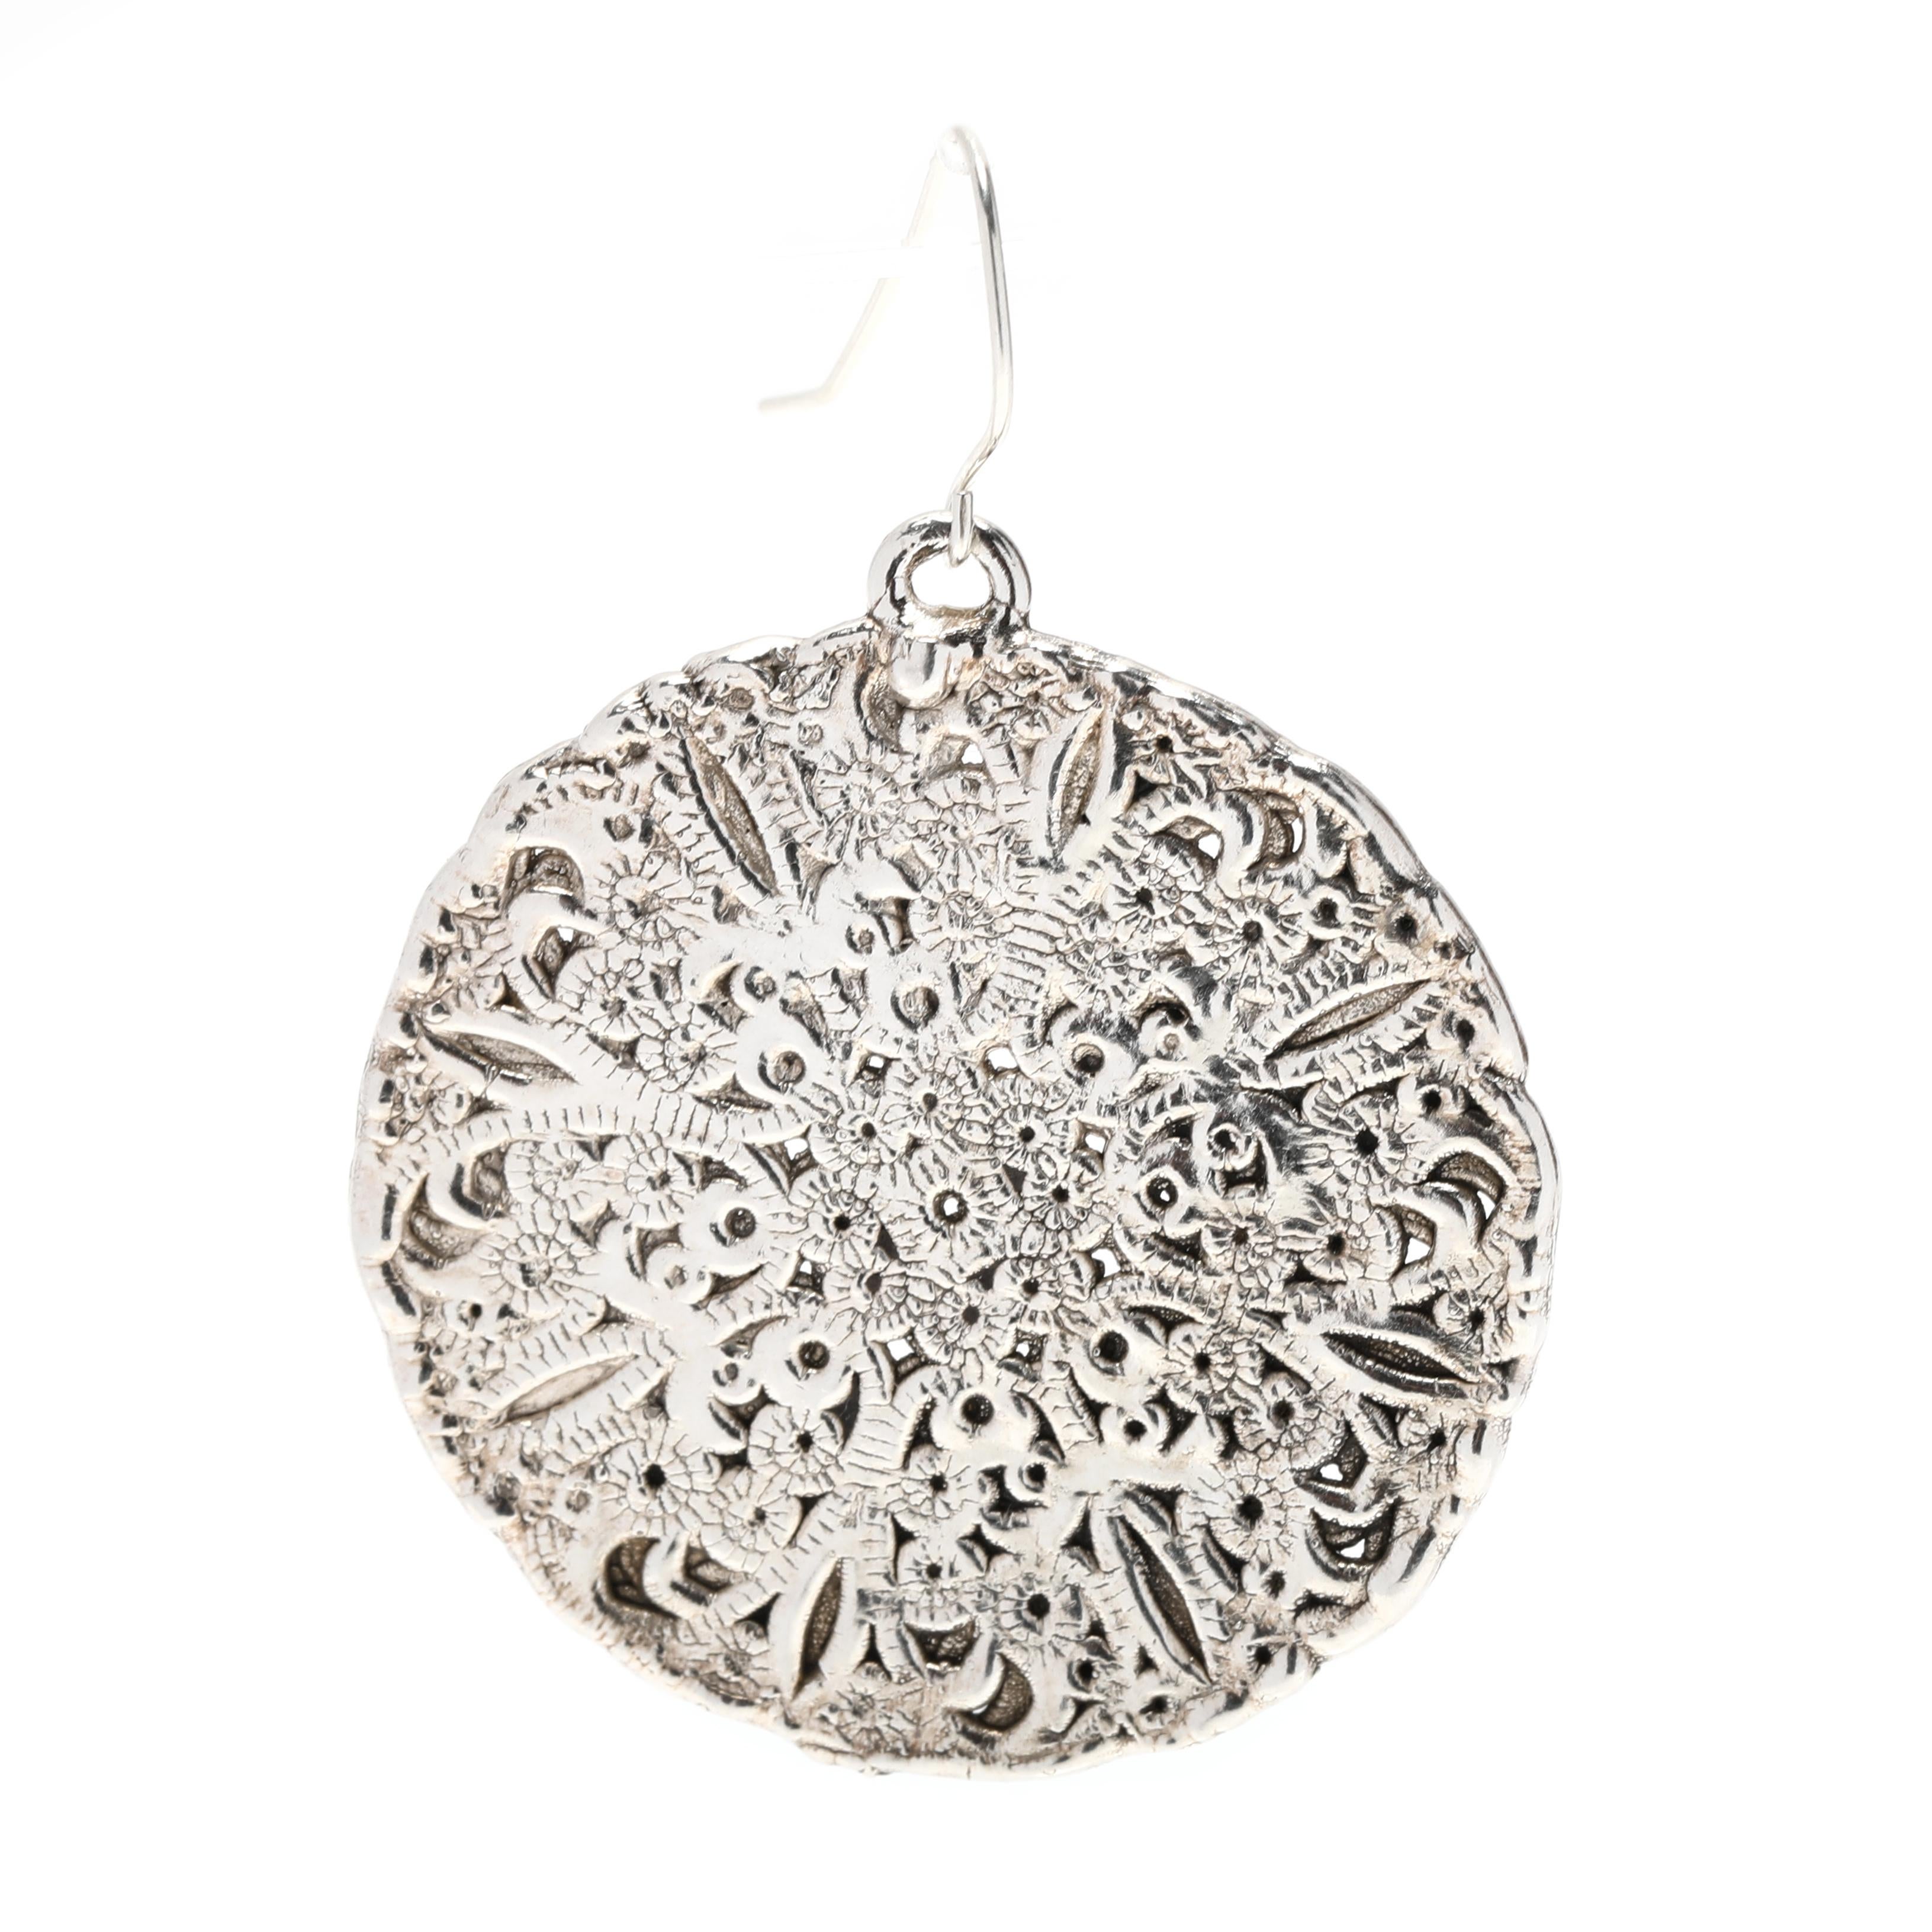 These beautiful filigree lace circle dangle earrings are perfect for any occasion. Crafted from sterling silver, the organic lace circle shape measures 2 1/8 inches in length. The flat dangle design is timeless and elegant for any look. Whether